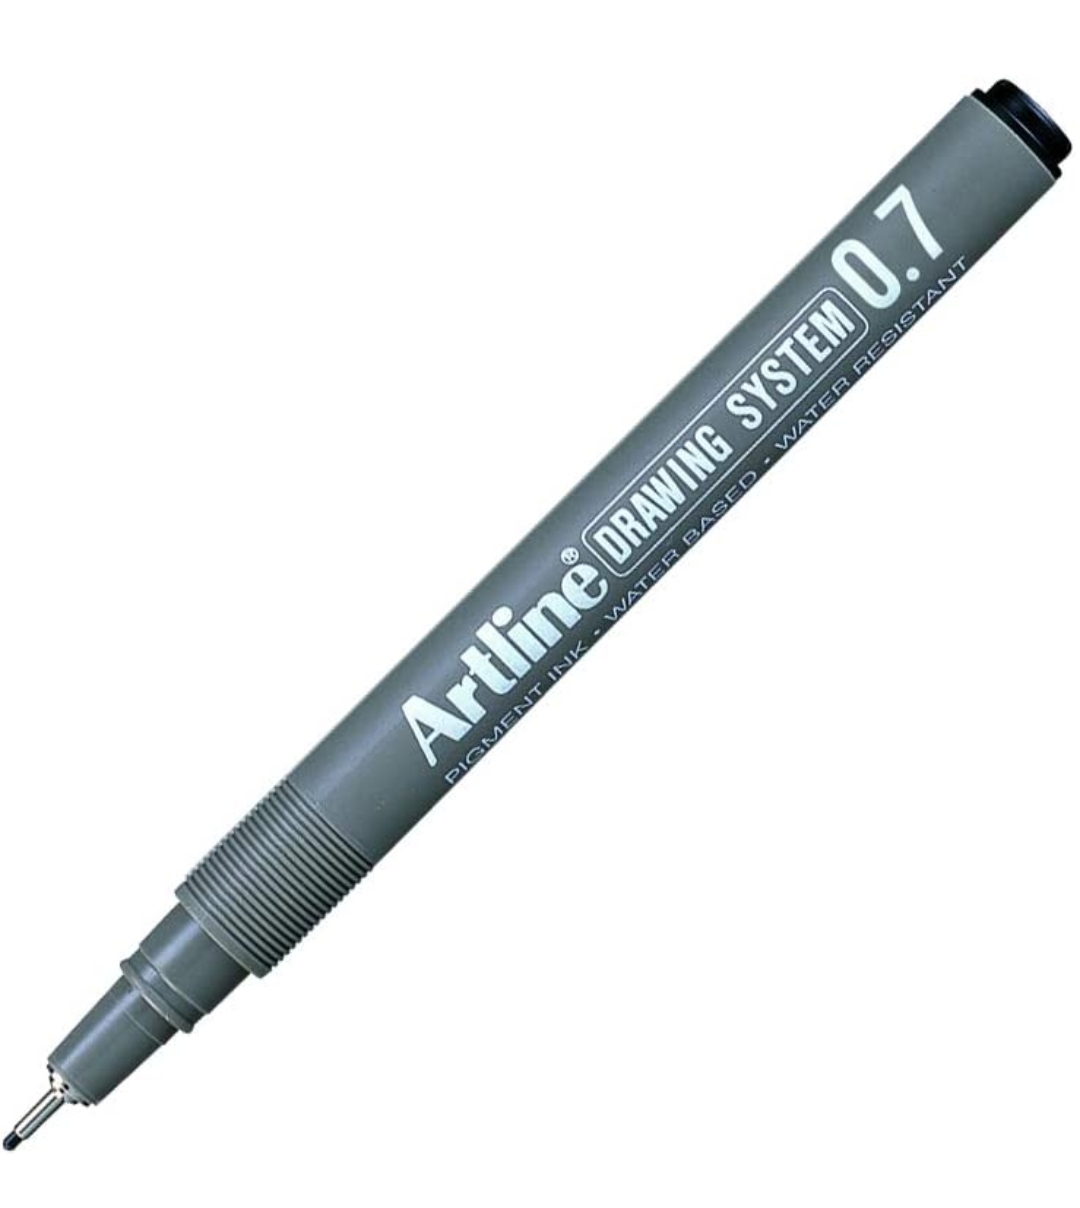 Artline Drawing System Artistic Technical Pen 0.7 mm Point Size Pack of 1